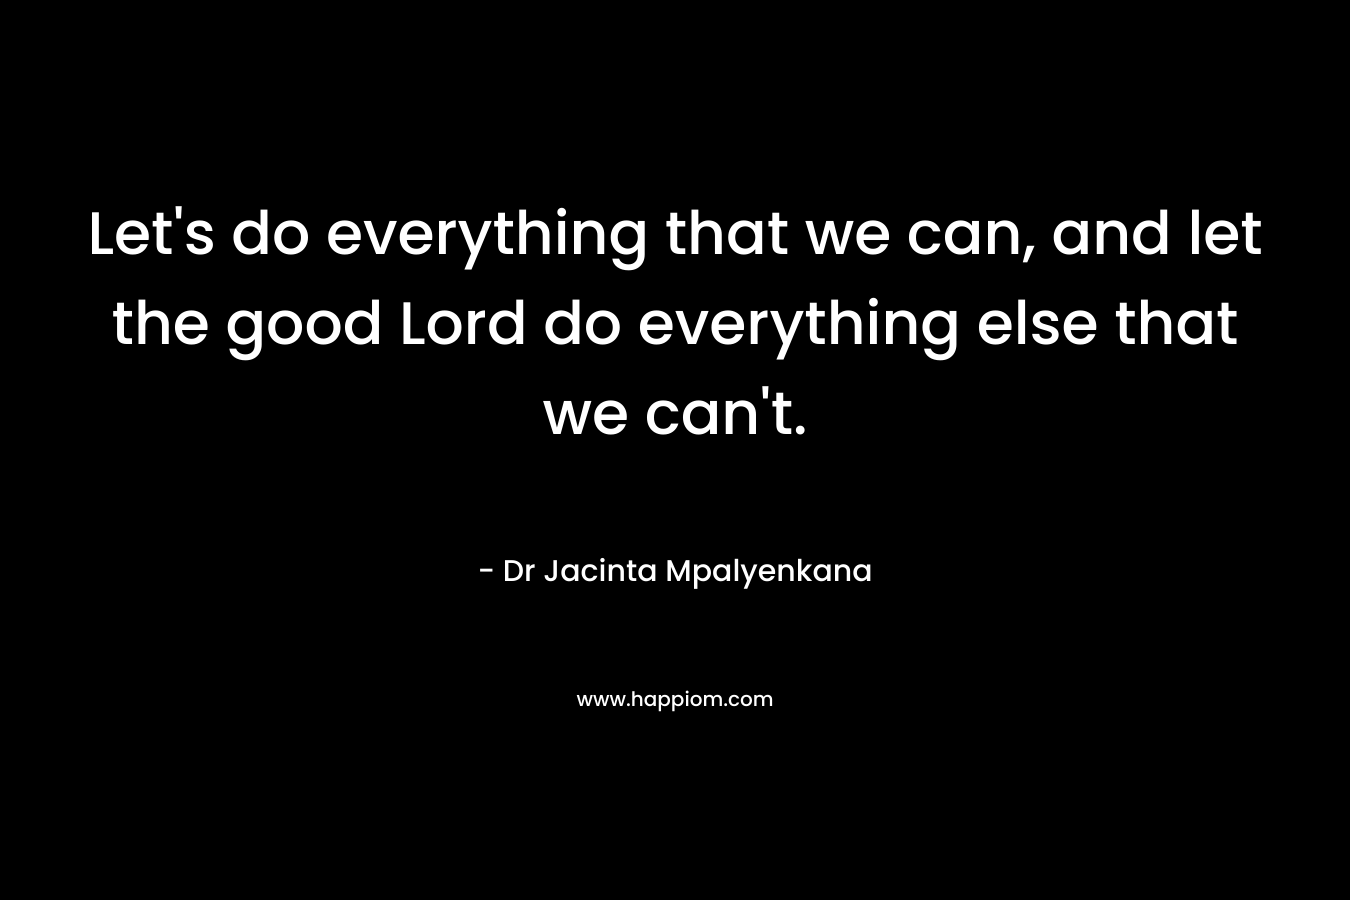 Let's do everything that we can, and let the good Lord do everything else that we can't.